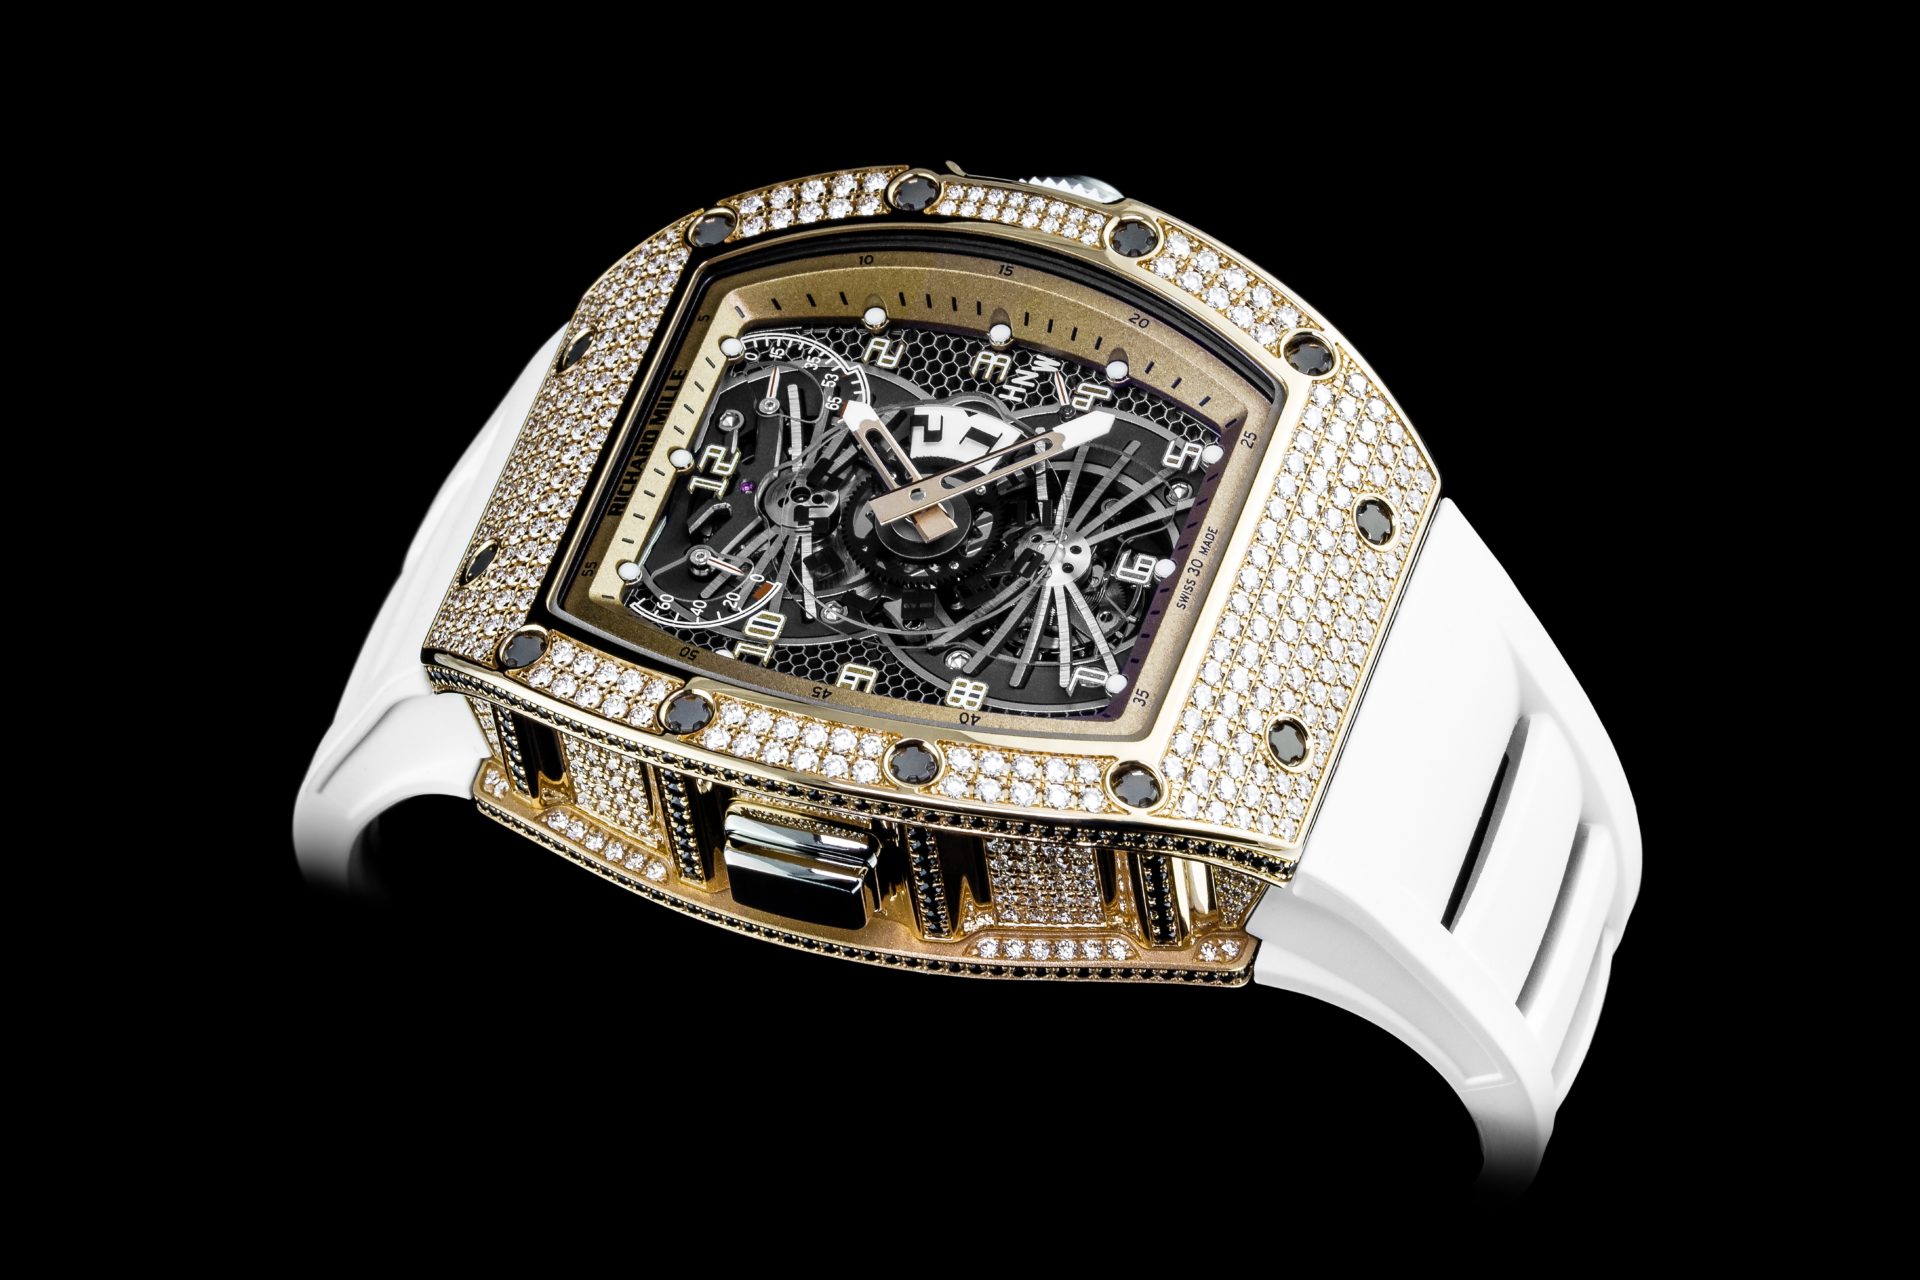 Richard Mille RM65 01 Rose Gold Automatic Winding Split-seconds ChronographRichard Mille RM65-01 Automatic Winding Split Seconds Chronograph